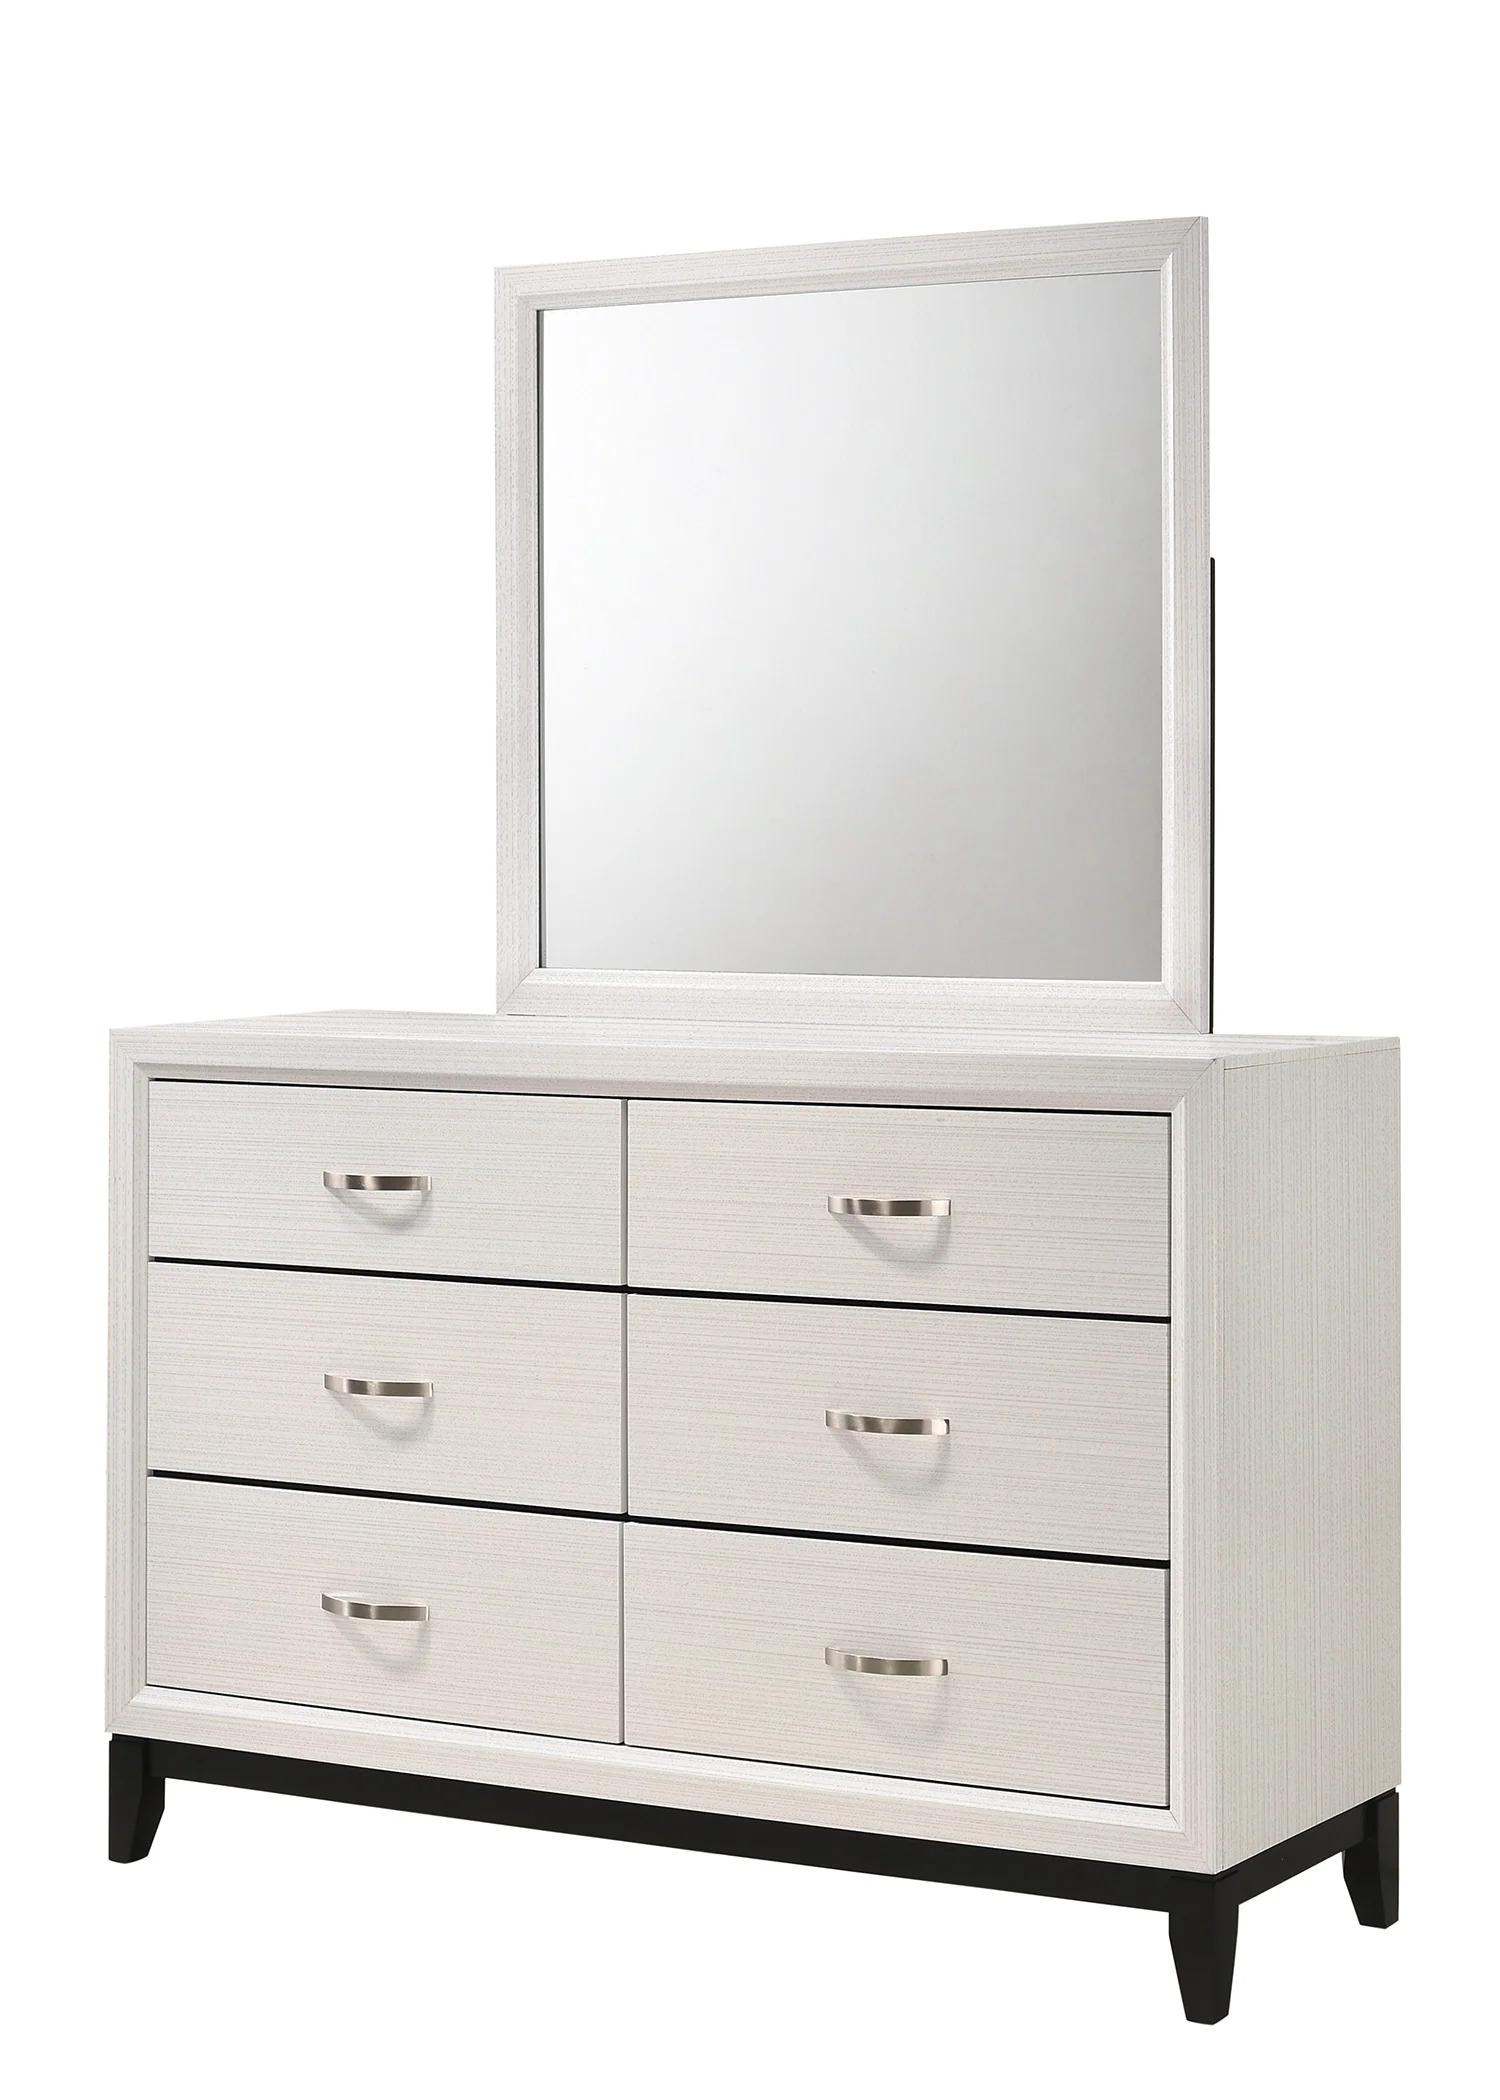 WHite Panels Bedroom Group with dresser and mirror and nightstand